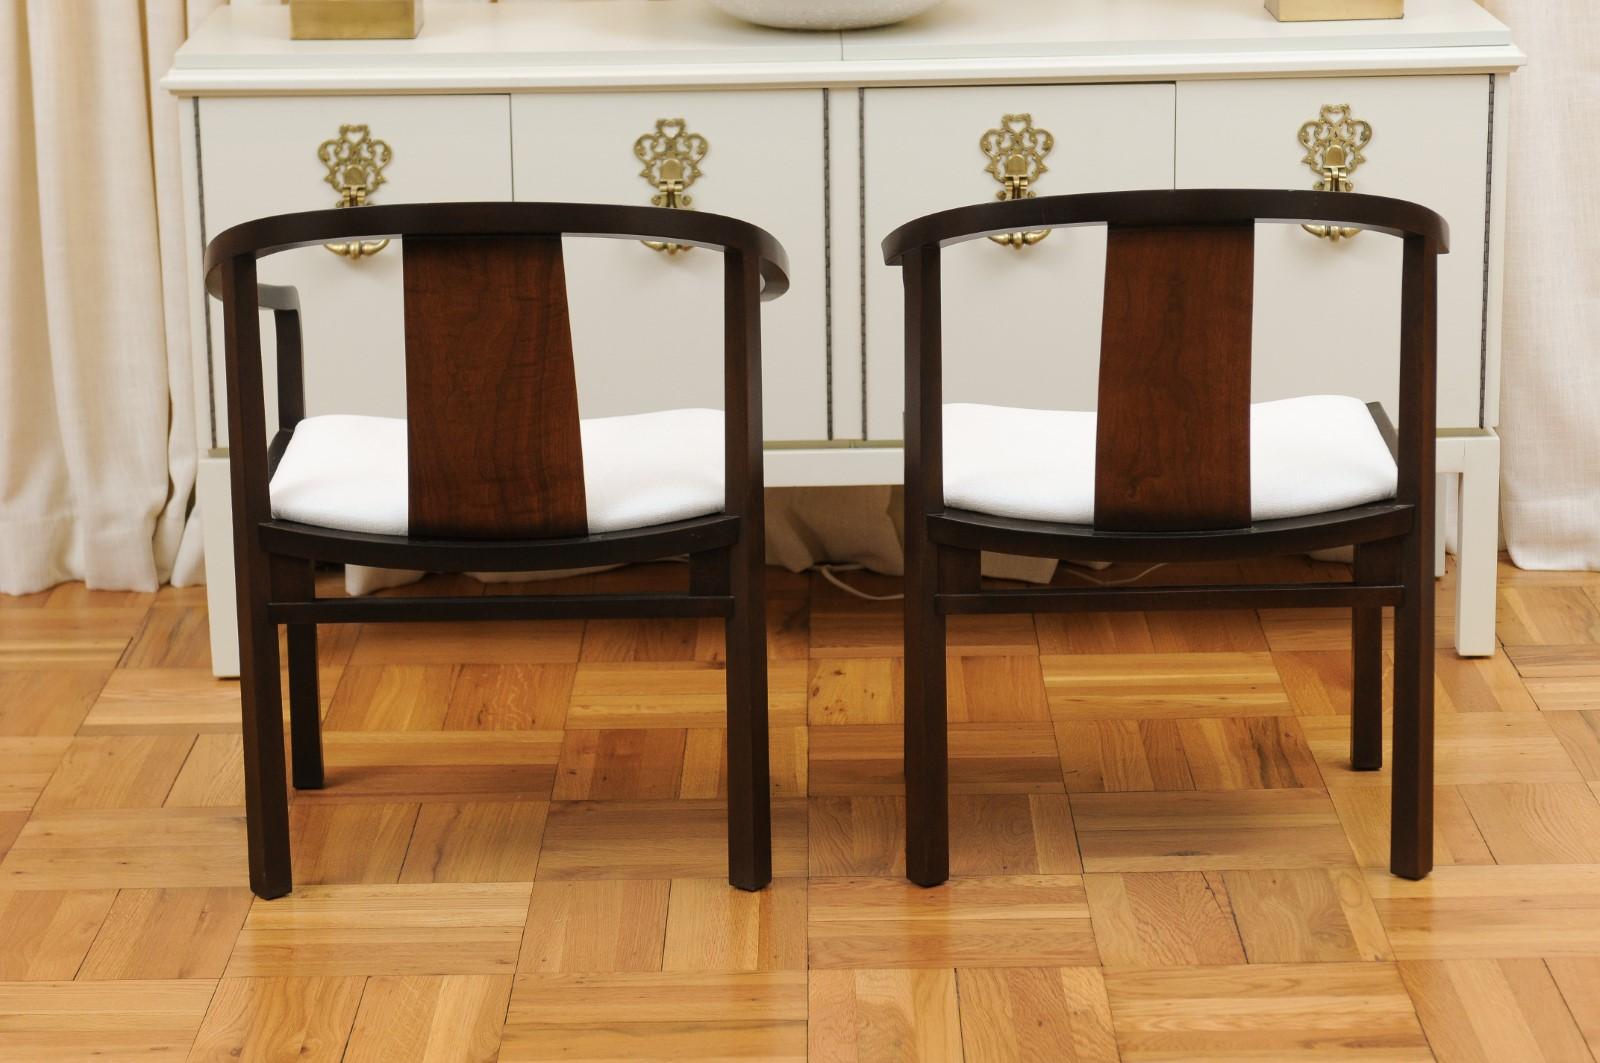 Incredible Set of 14 Rare Walnut Dining Chairs by Michael Taylor, circa 1955 For Sale 1